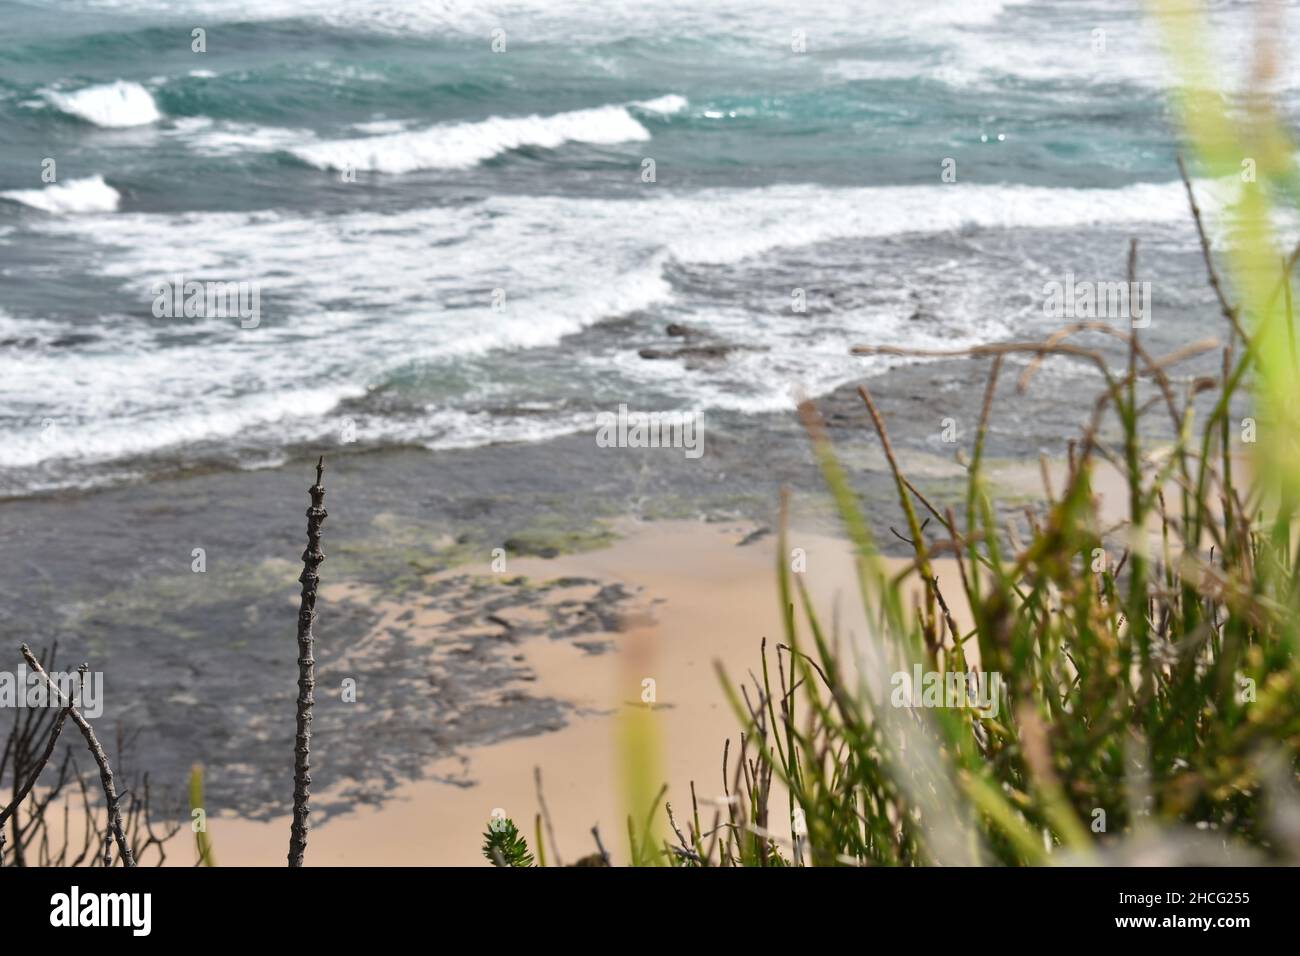 a view of a beach in Jervis Bay, NSW, Australia with surrounding beachfront houses and flora Stock Photo